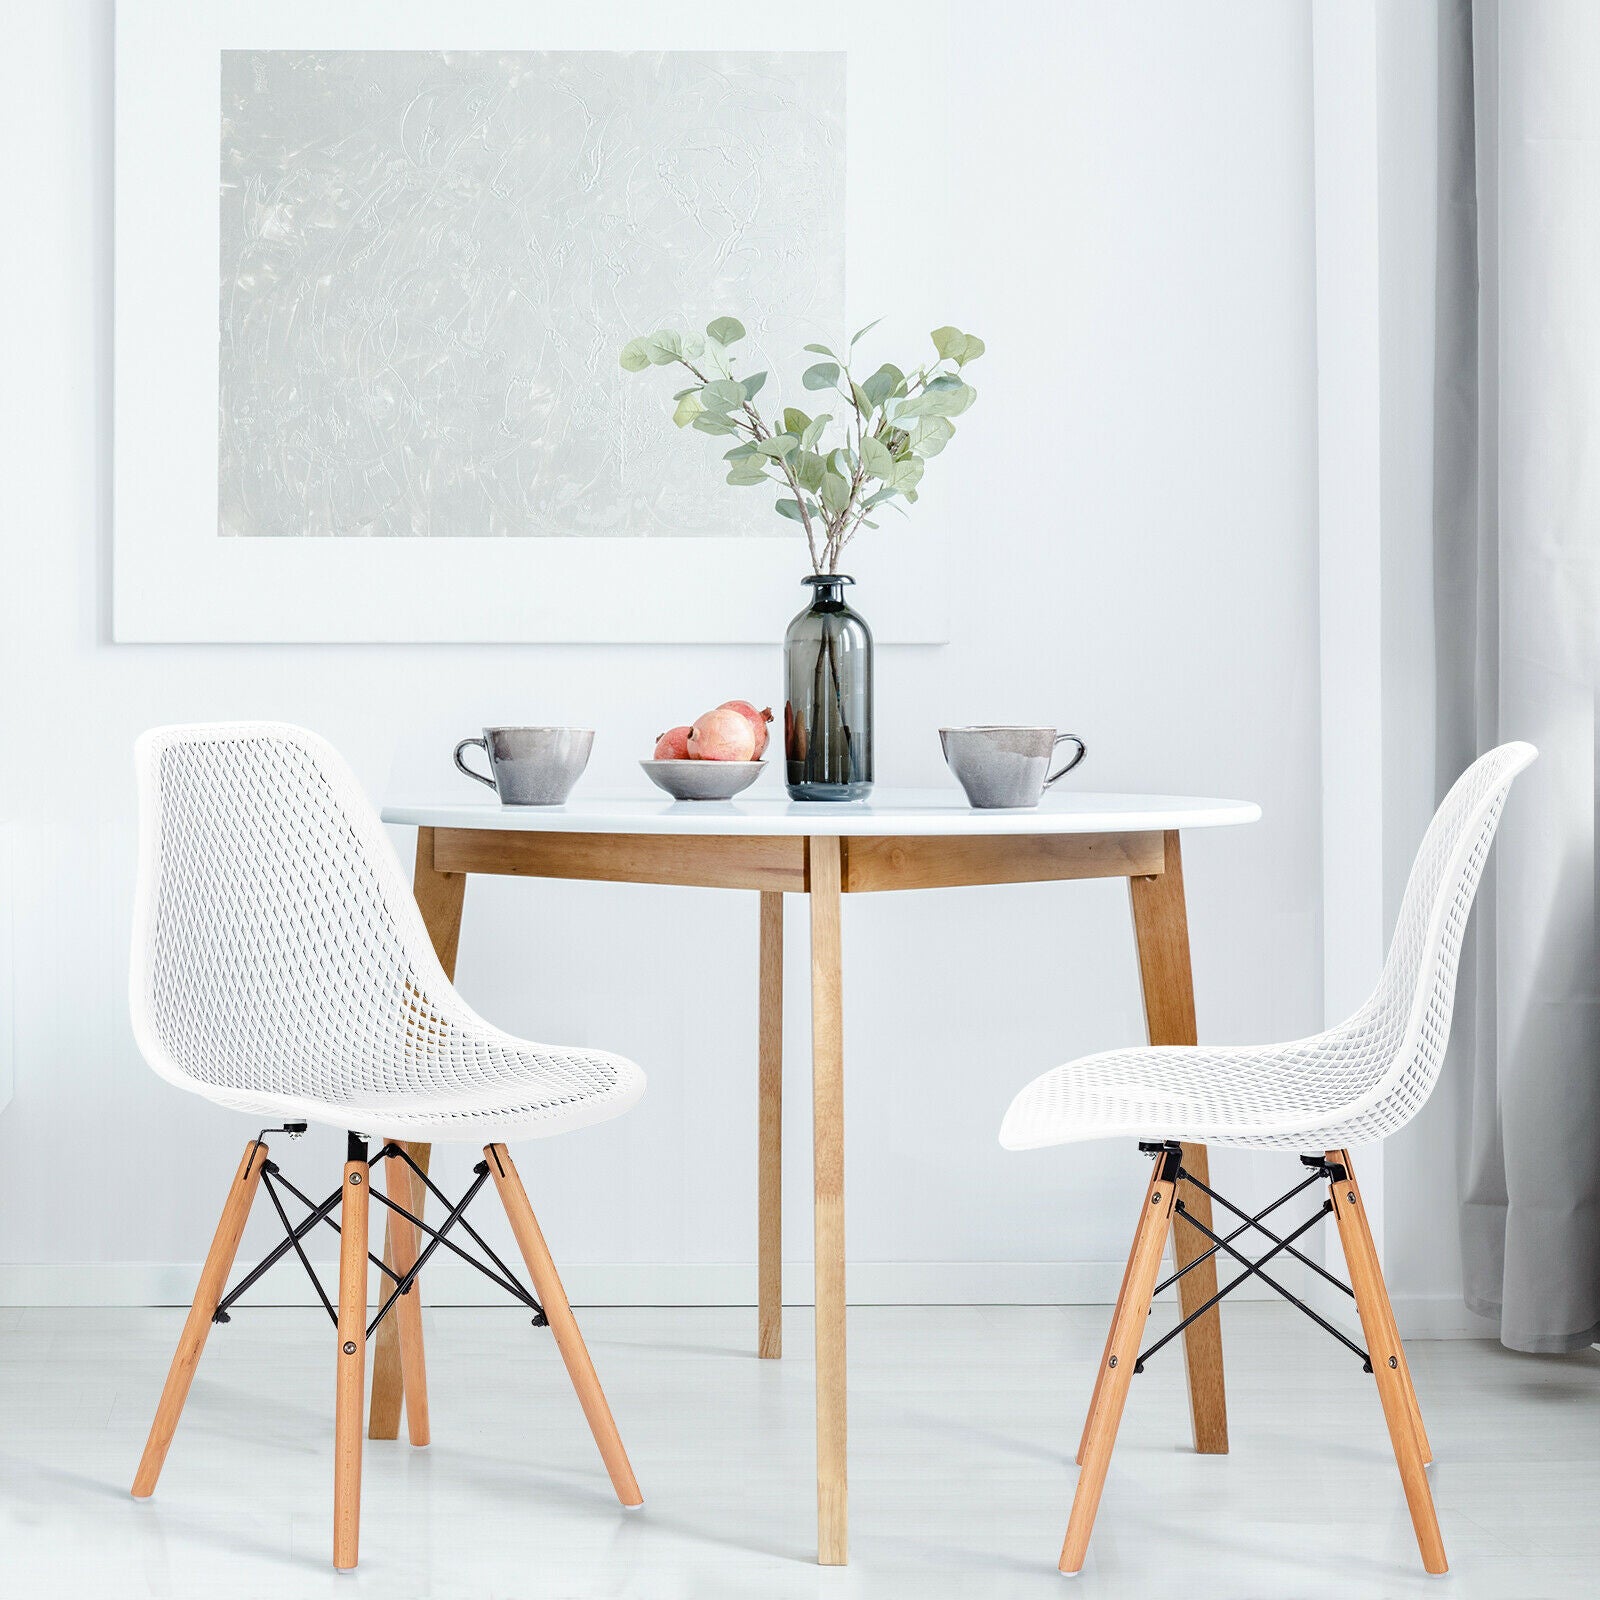 Dining Chair With Modern Wood Leg - Set of 2 Modern Dining Chairs